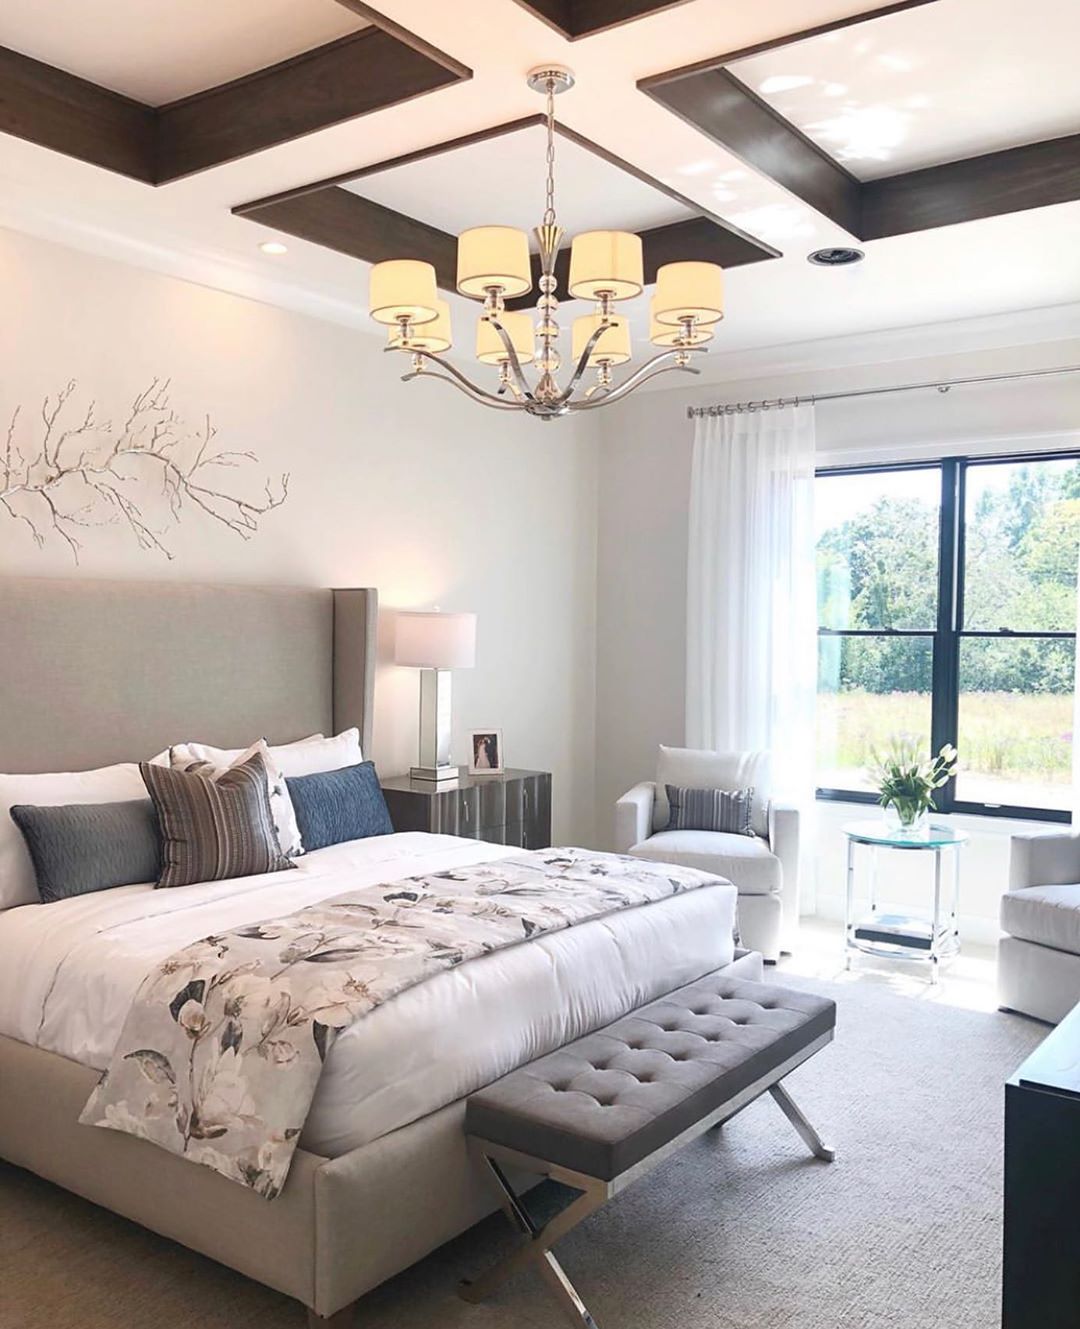 Large First-Floor Master Bedroom with Recessed Ceiling Detail. Photo by Instagram user @yournewhometeamohio